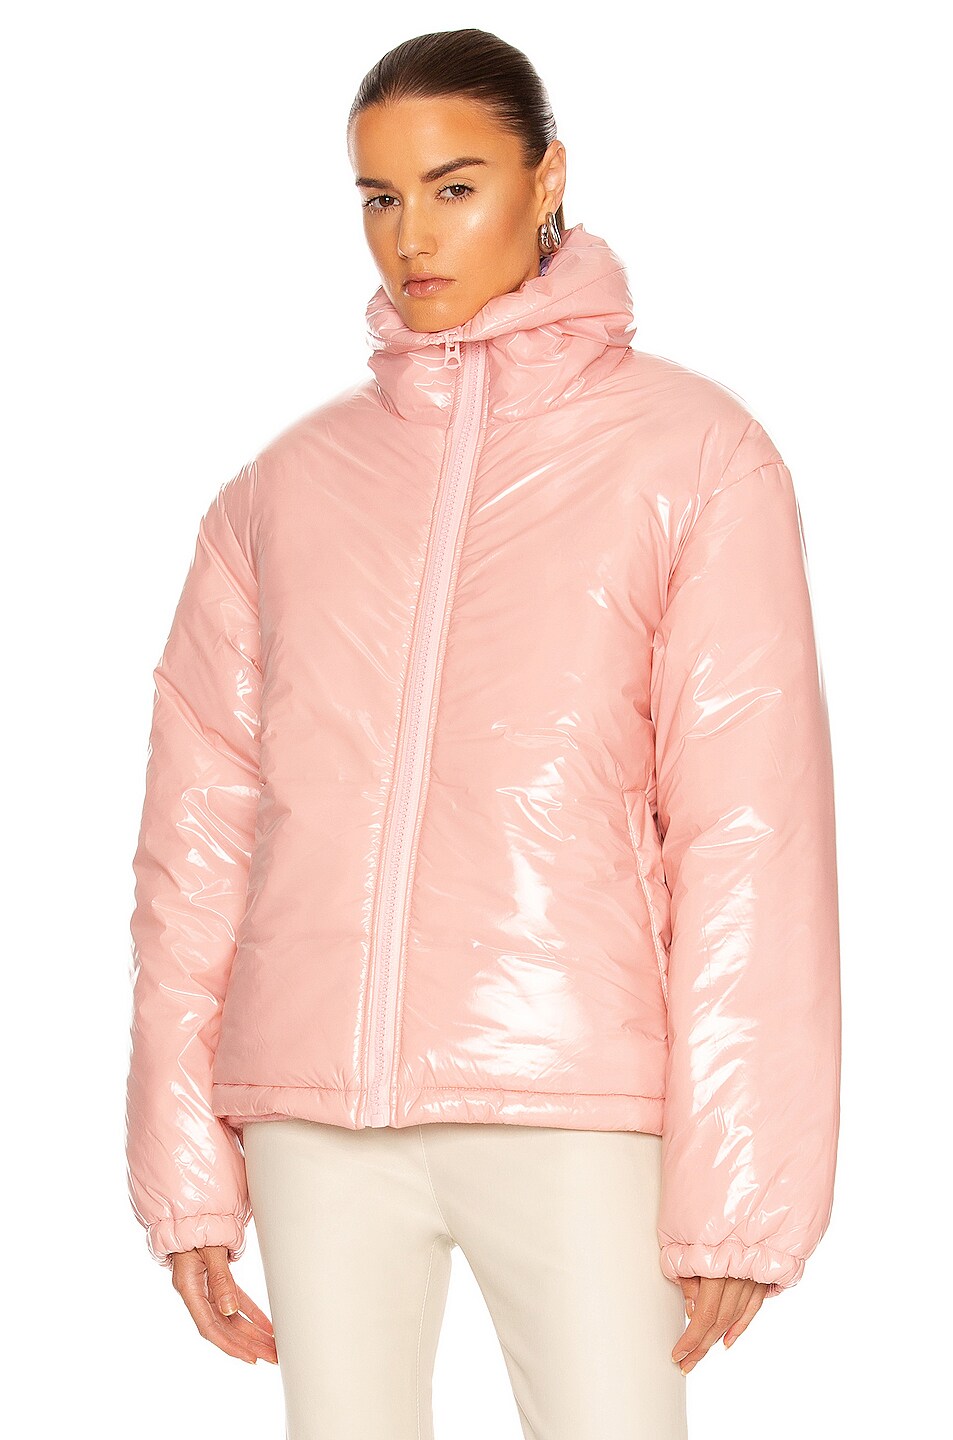 Acne Studios Gloss NY Face Jacket in Blush Pink | FWRD